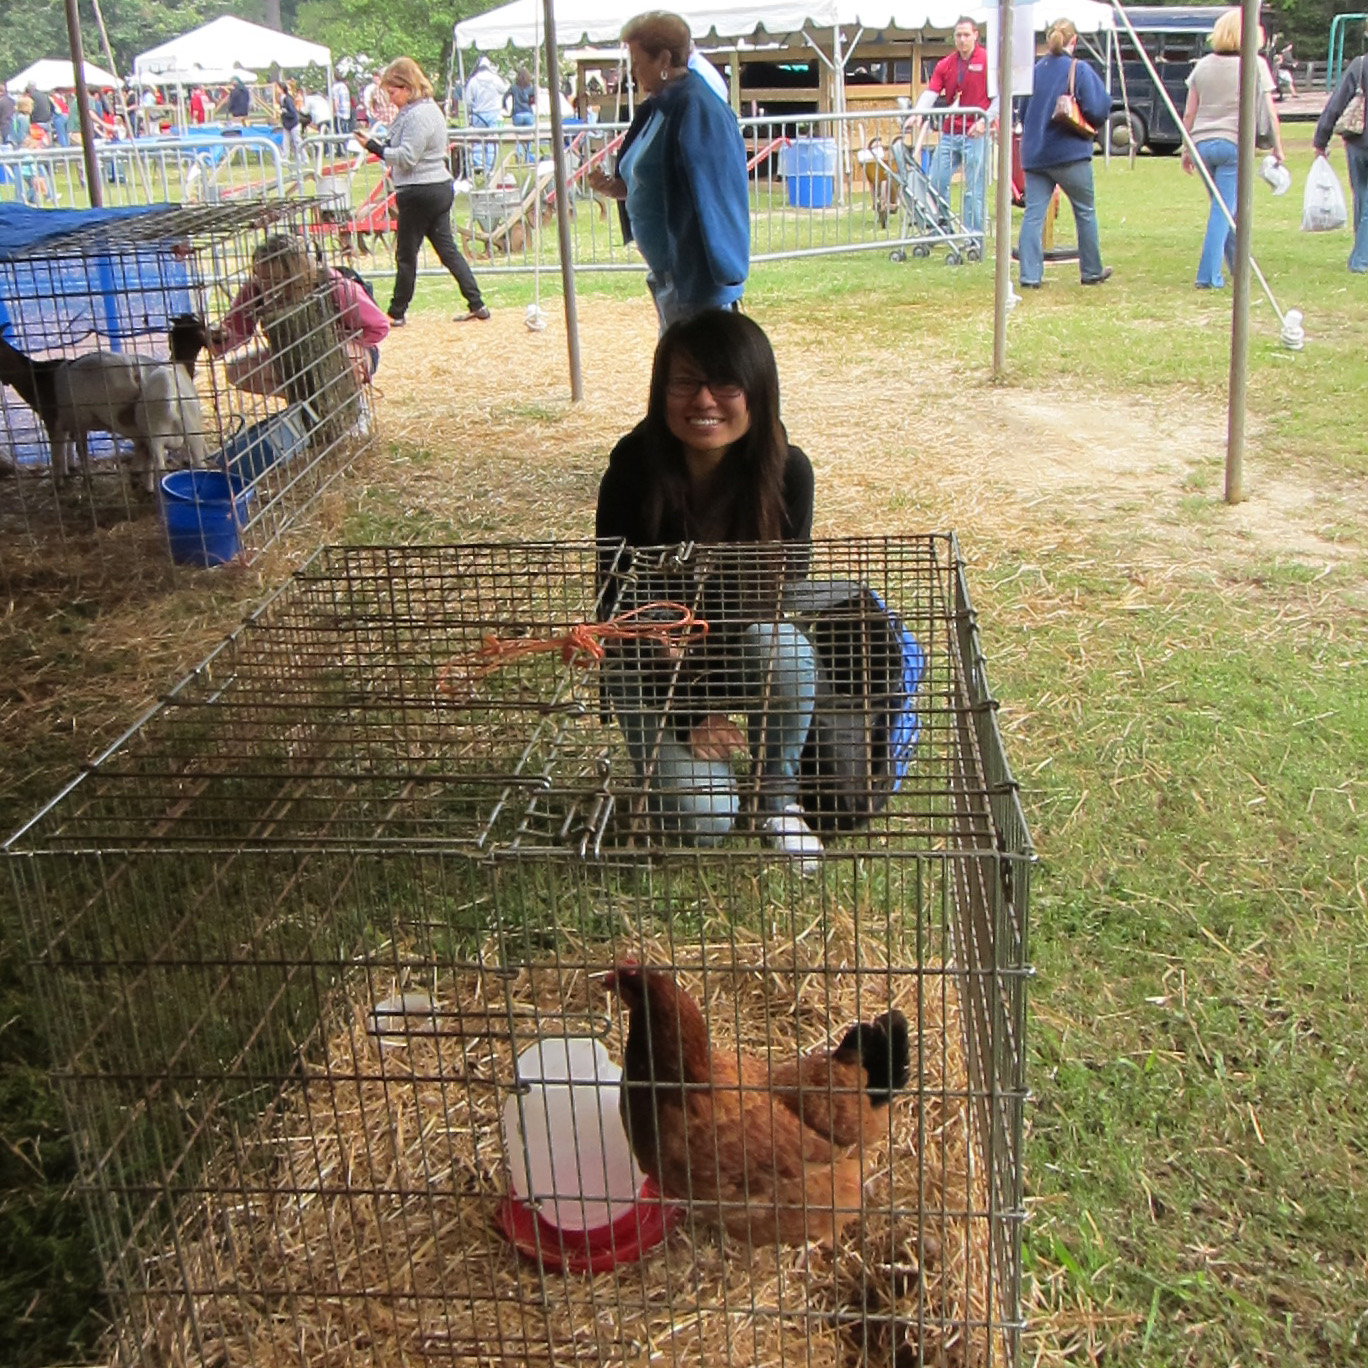 Seeing some chickens at the state fair